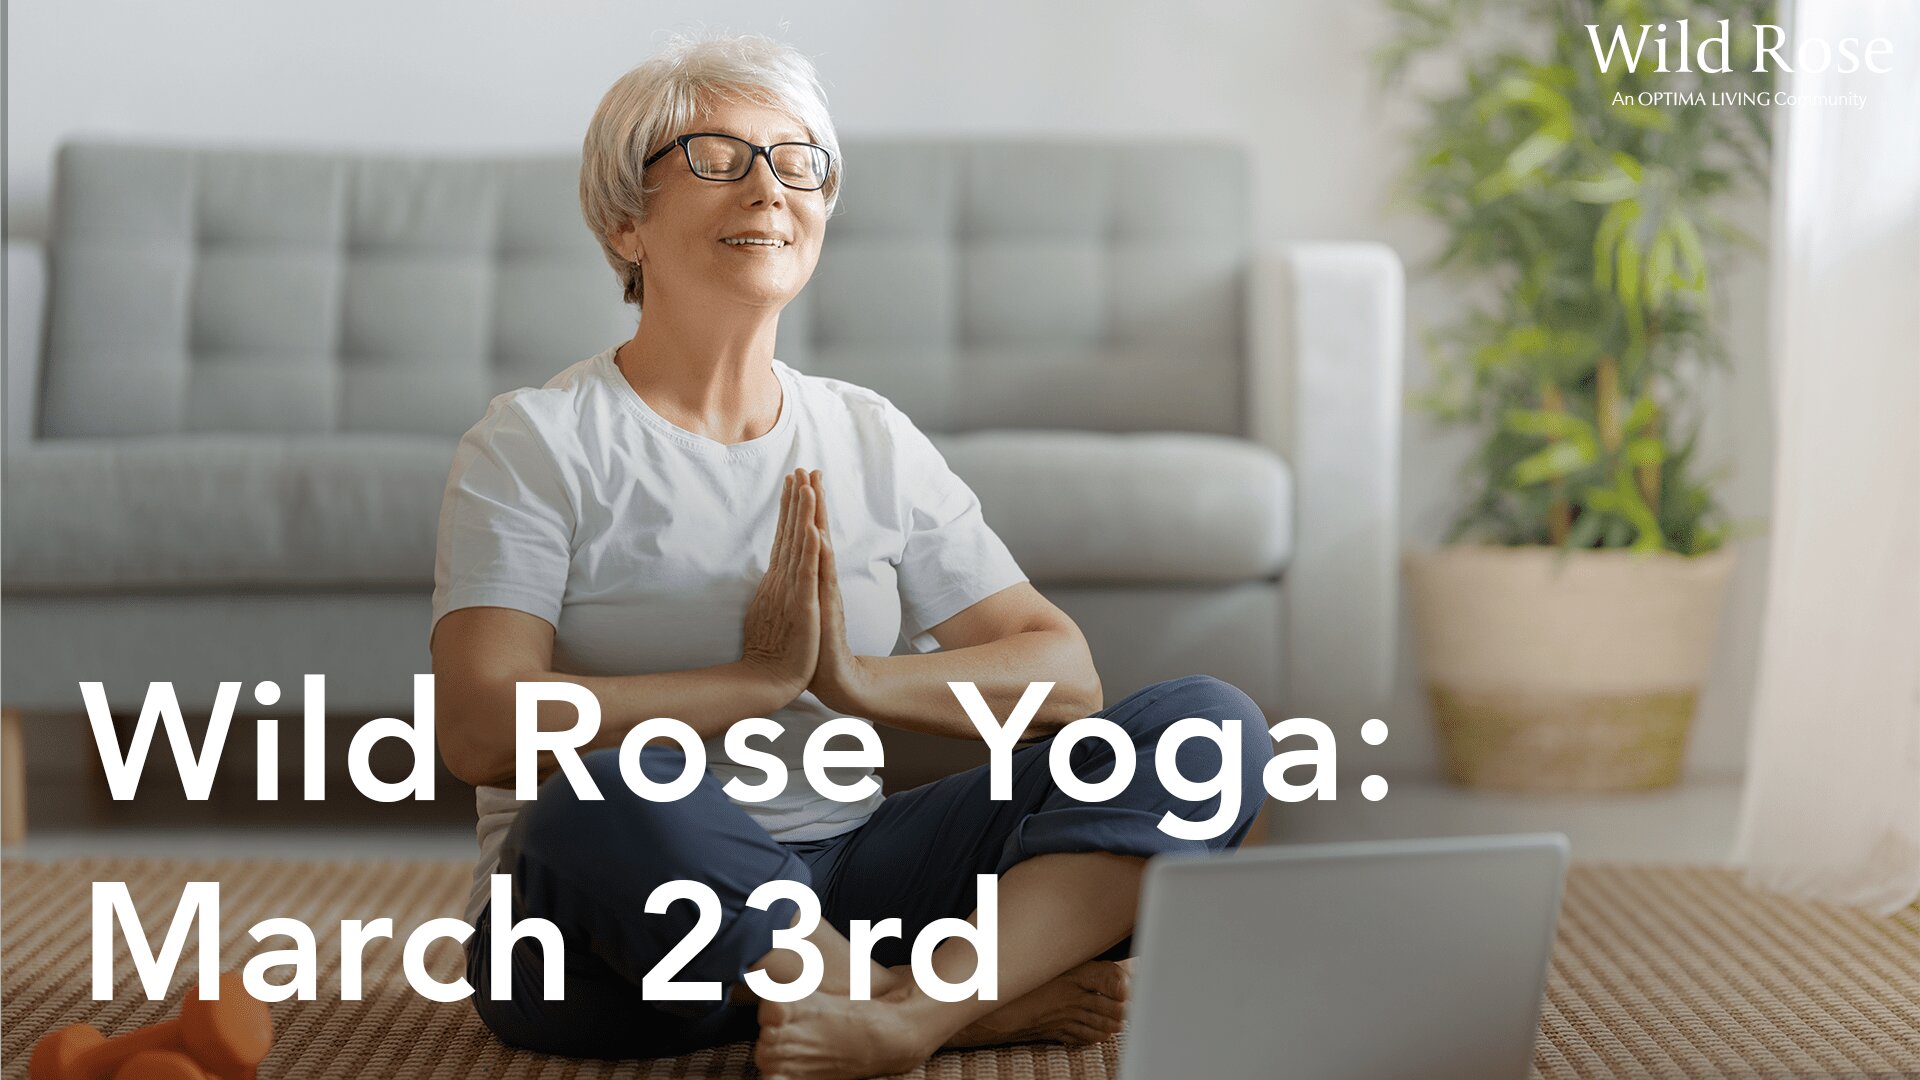 Wild Rose stretching exercises for seniors	: March 23rd